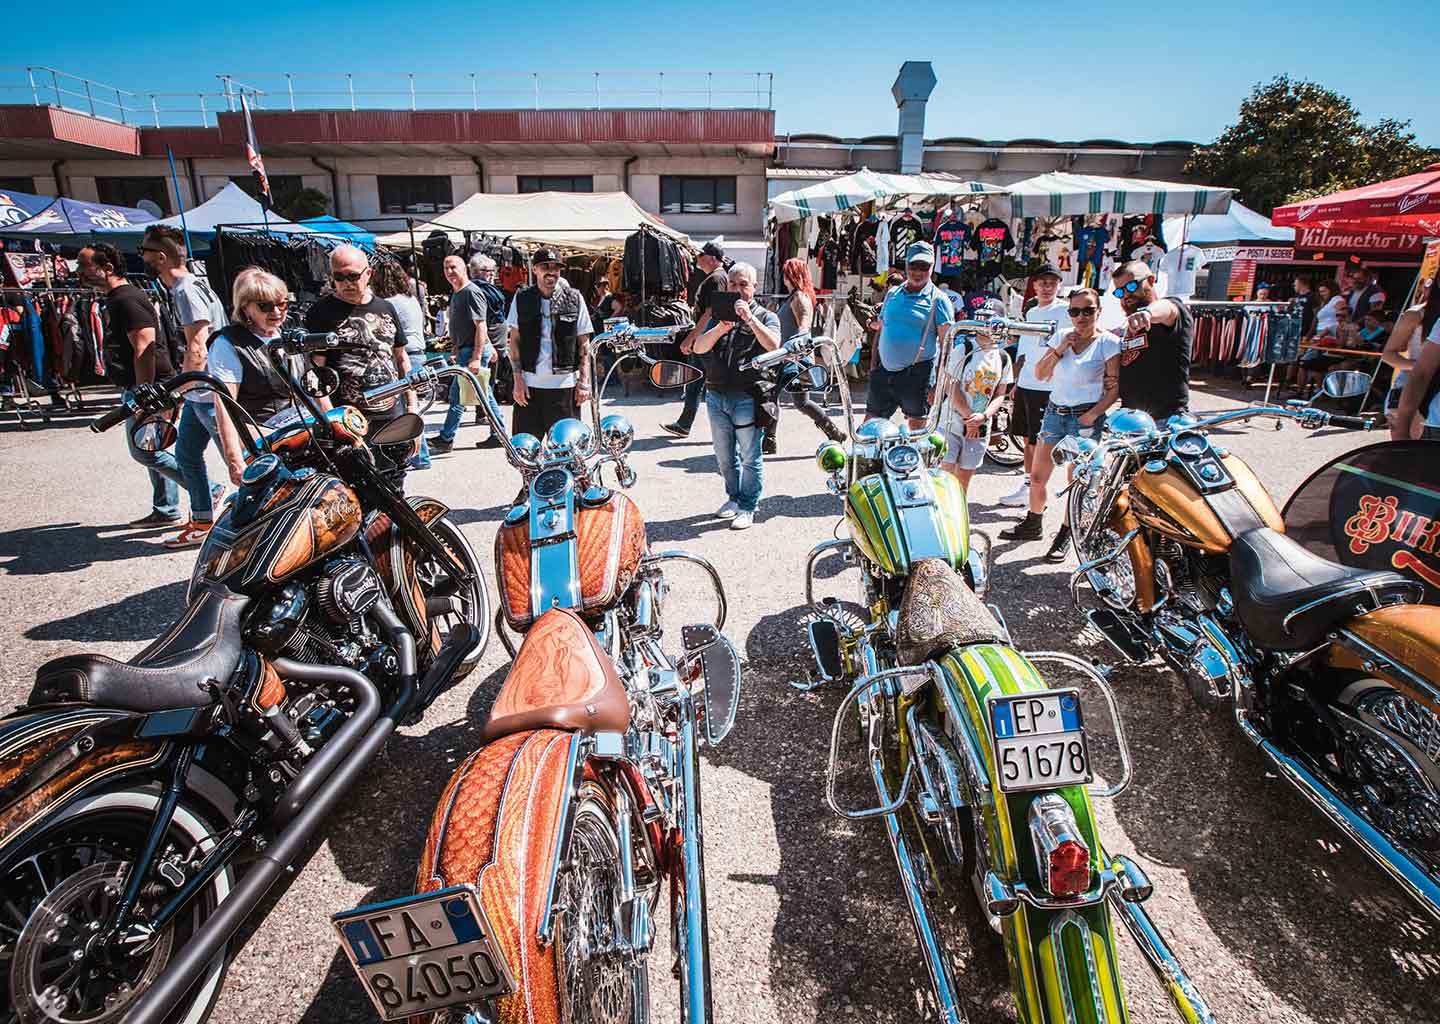 A whole herd of viclas to ogle at this year’s Biker Fest International.